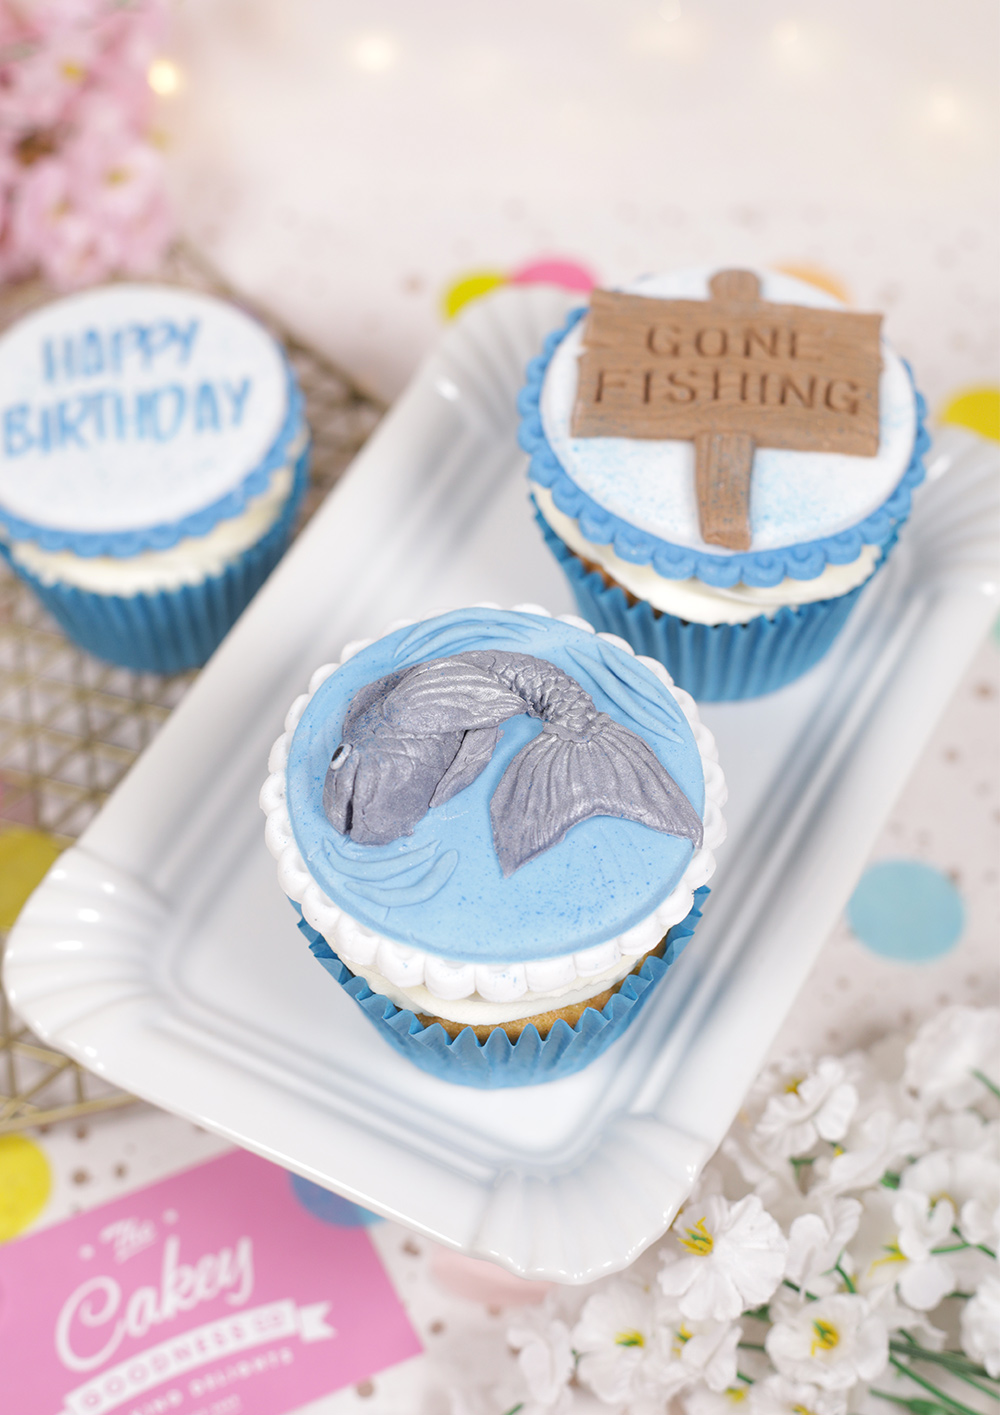 Fishing themed cupcakes with fondant toppers